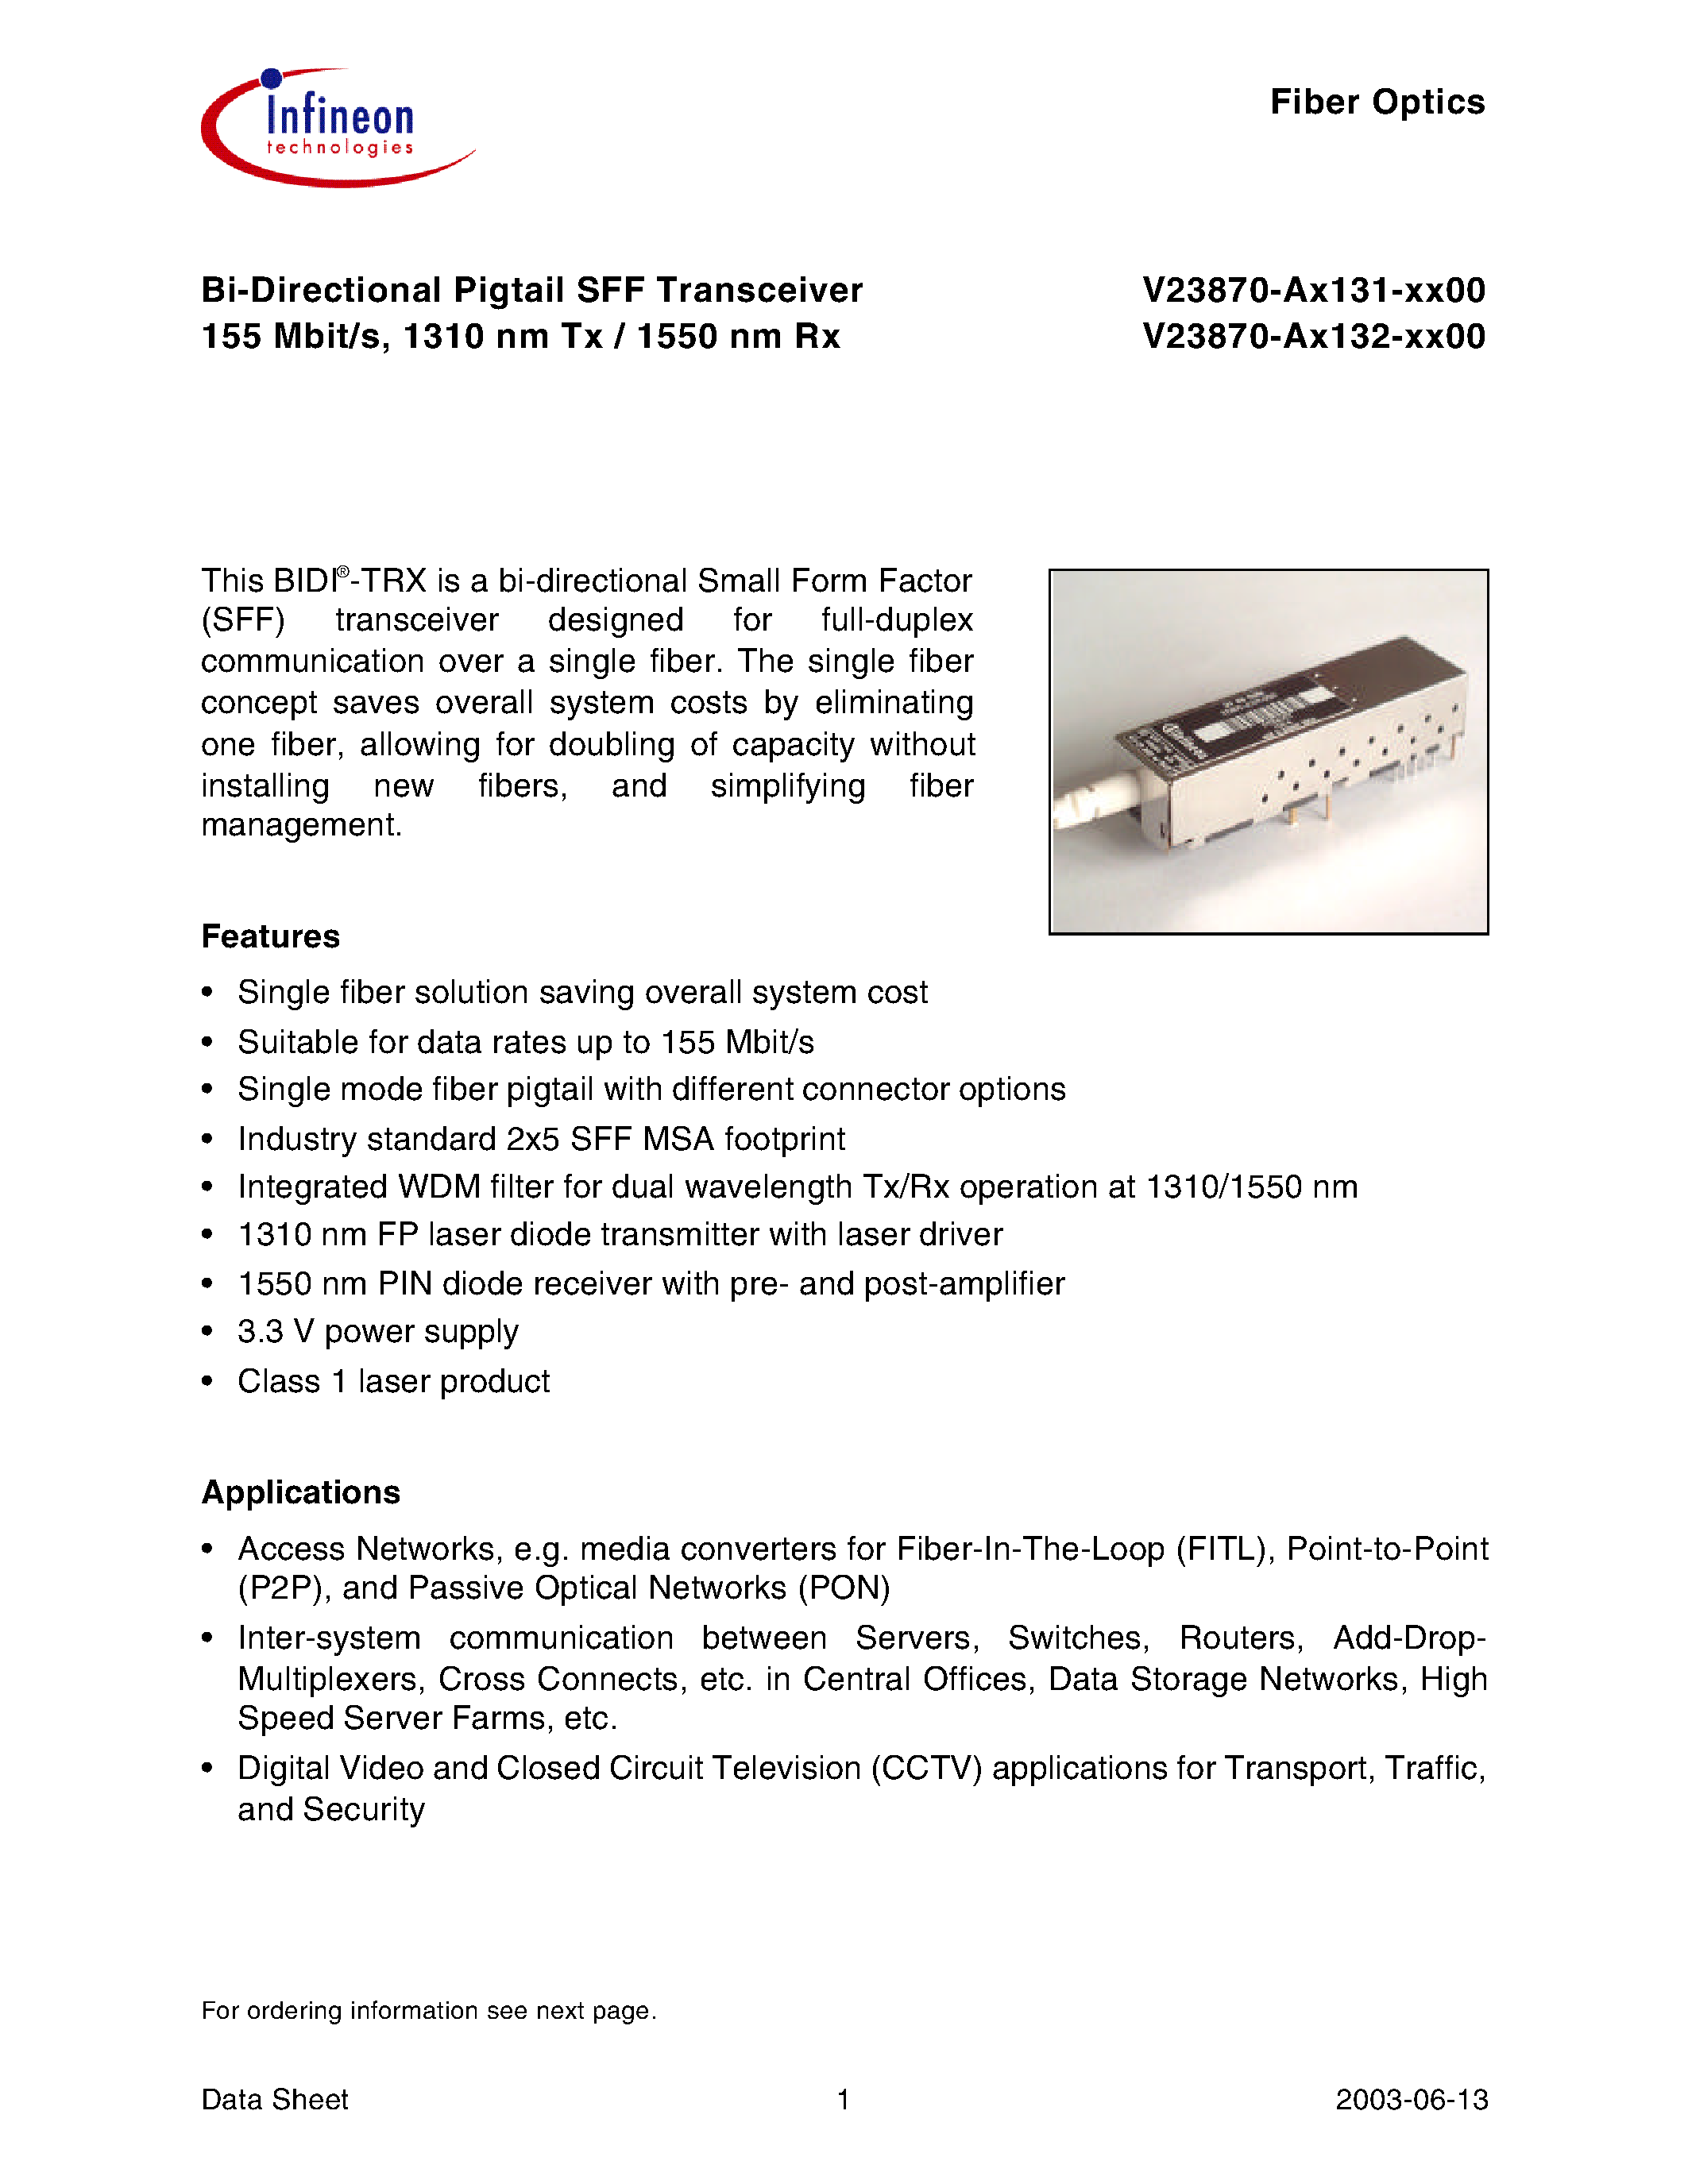 Datasheet V23870-A1132-C100 - Bi-Directional Pigtail SFF Transceiver 155 Mbit/s/ 1310 nm Tx / 1550 nm Rx page 1